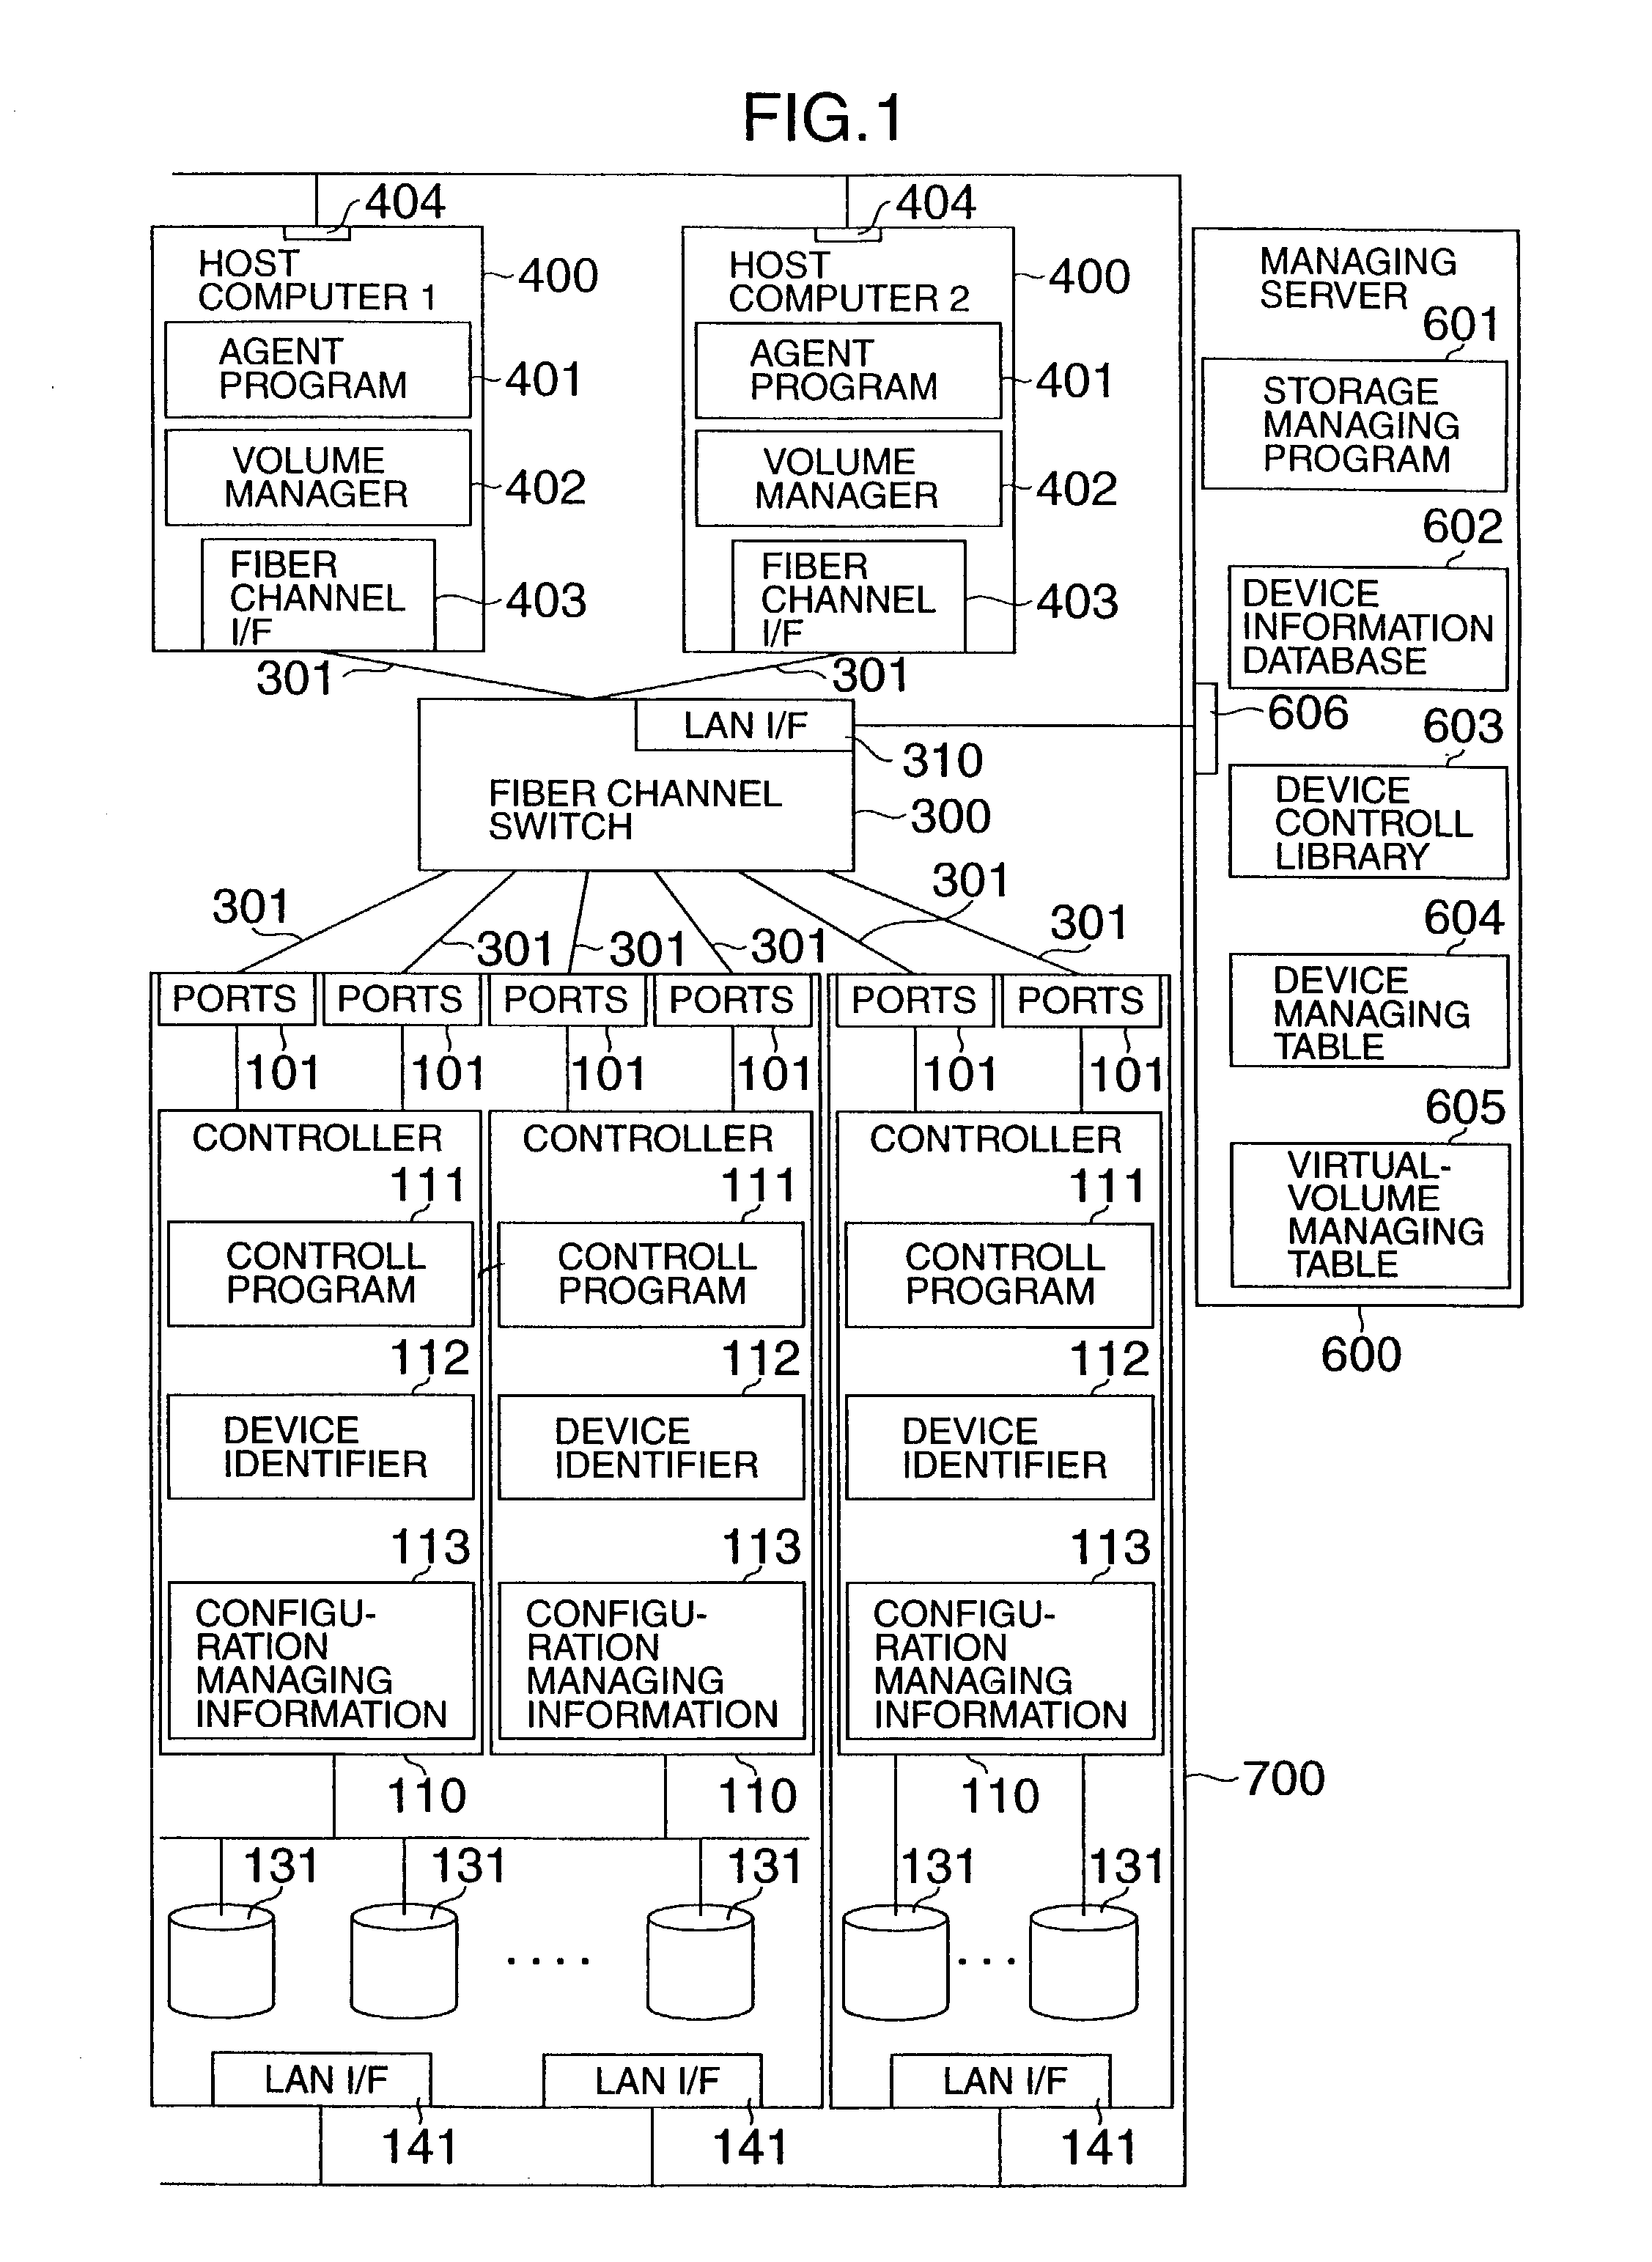 Computer system for managing storage areas in a plurality of storage devices